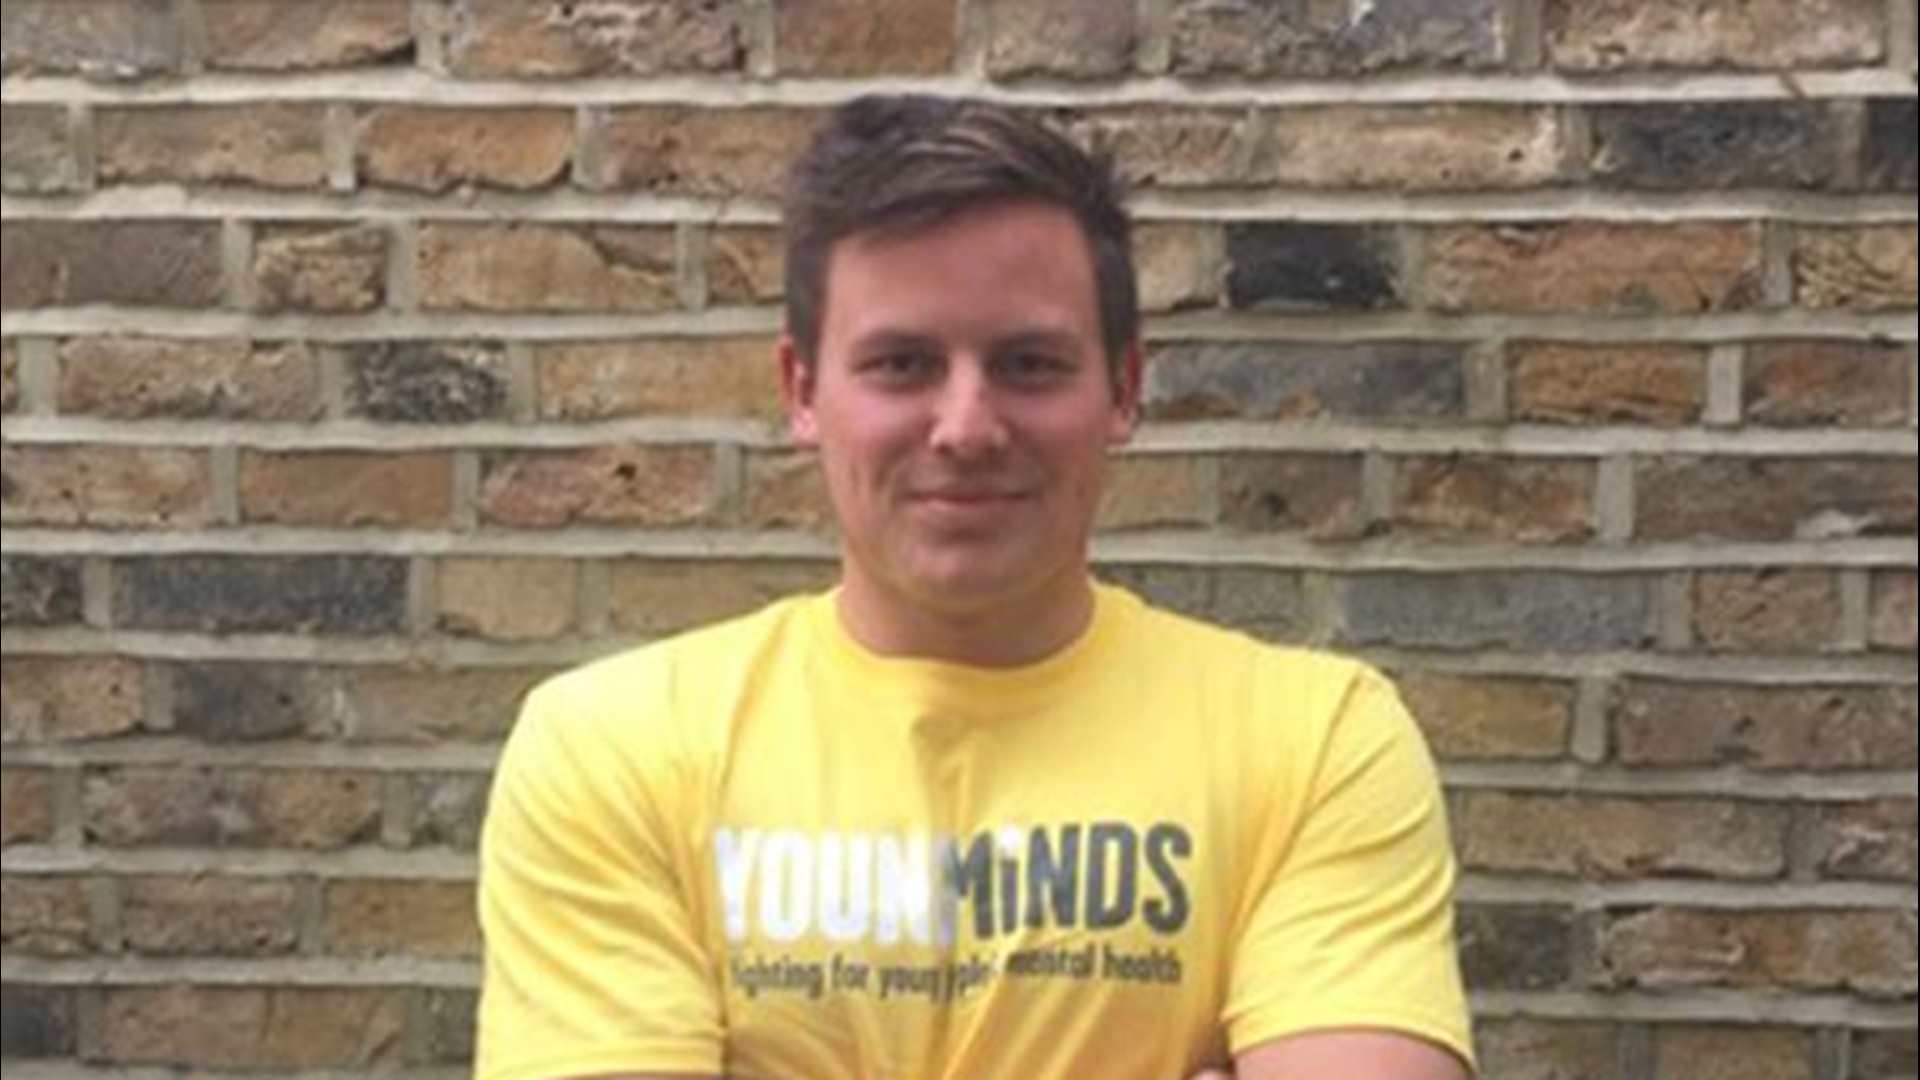 YoungMinds fundraiser Nick Davies with arms crossed standing in front of a brick wall